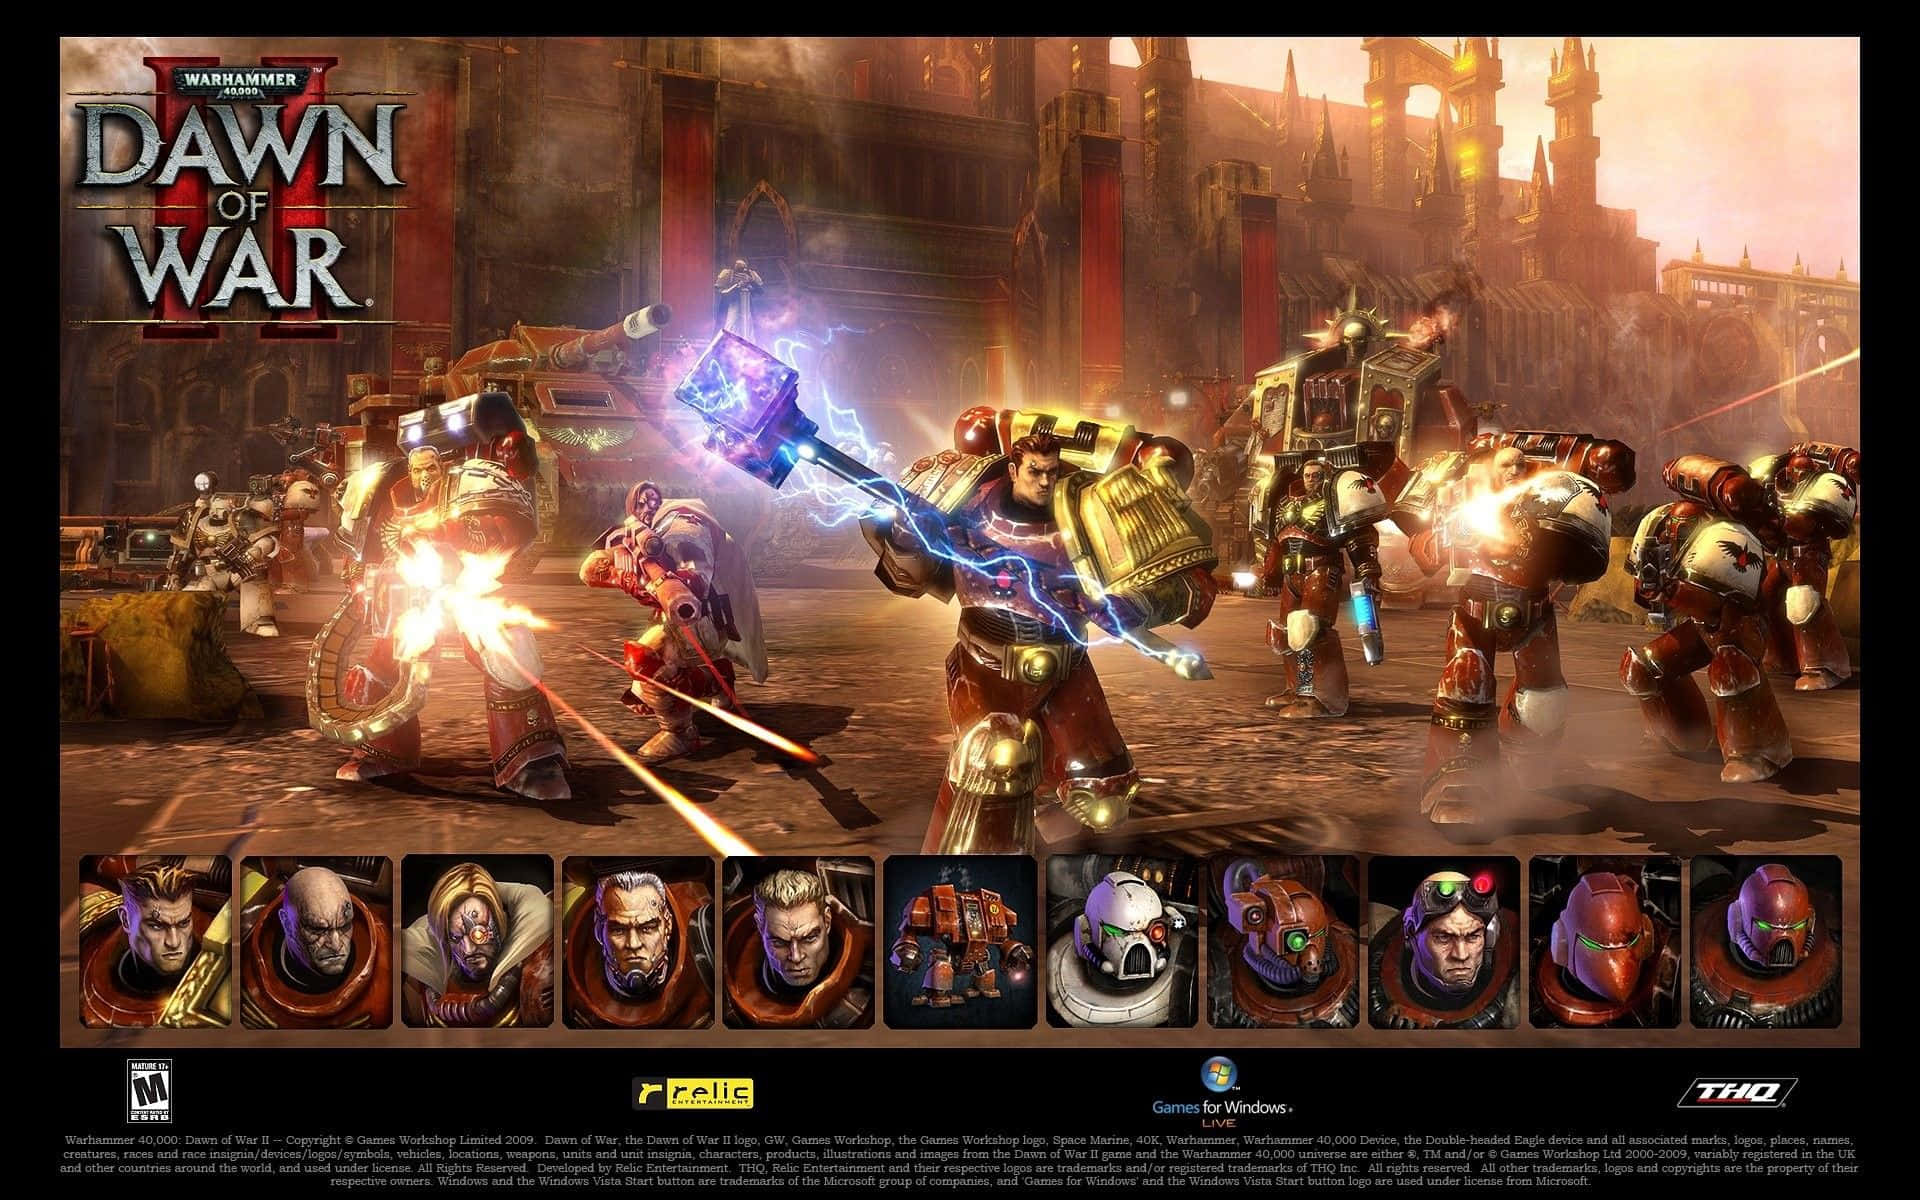 Ready your army and strategy in Dawn of War III